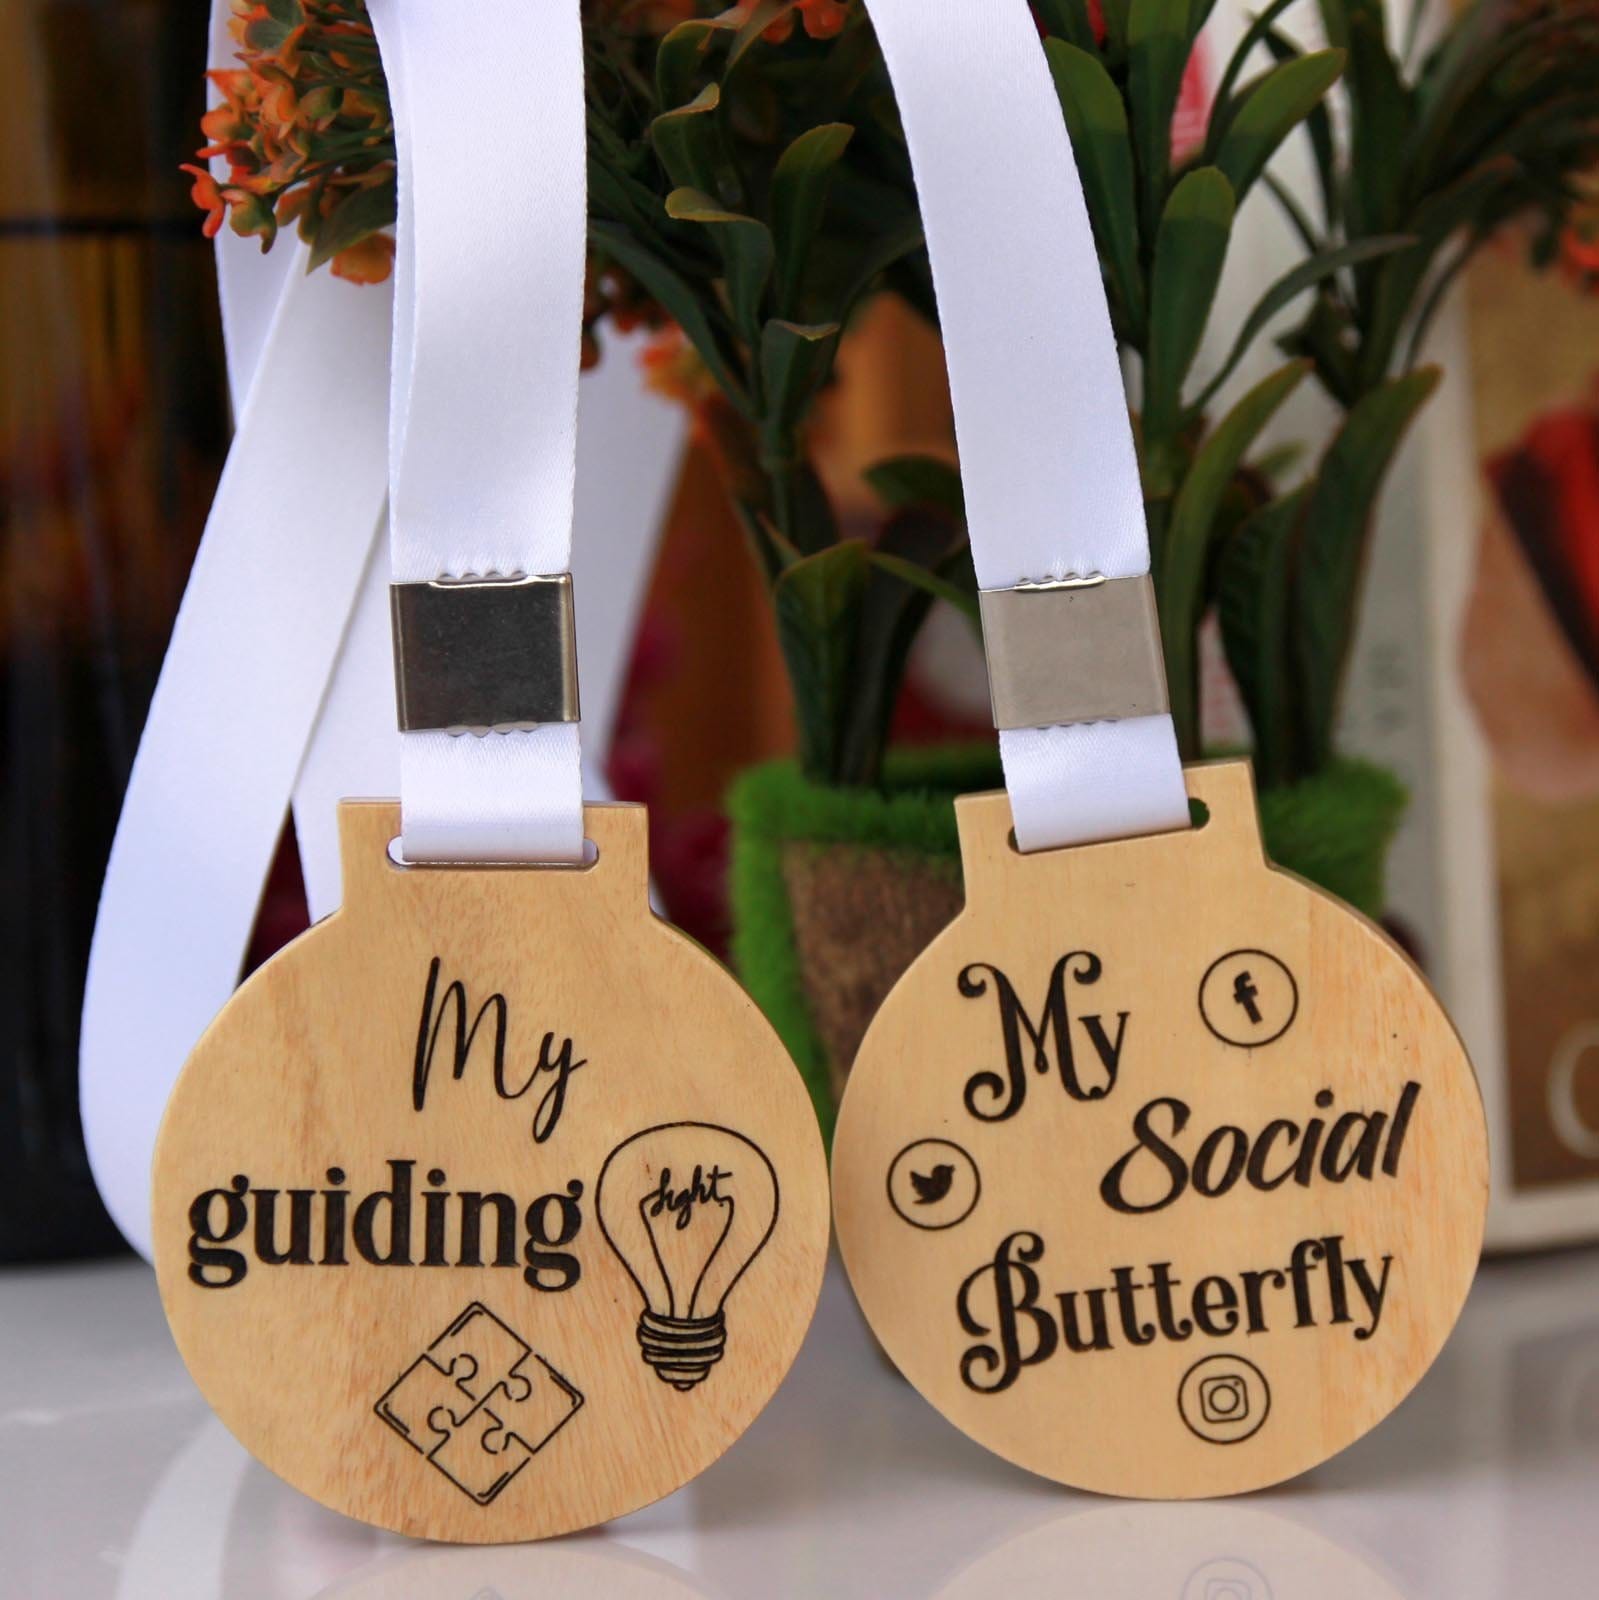 My Guiding Light & My Social Butterfly Wooden Medals. Affordable Gifts For Friends. Best Friendship Day Gifts.